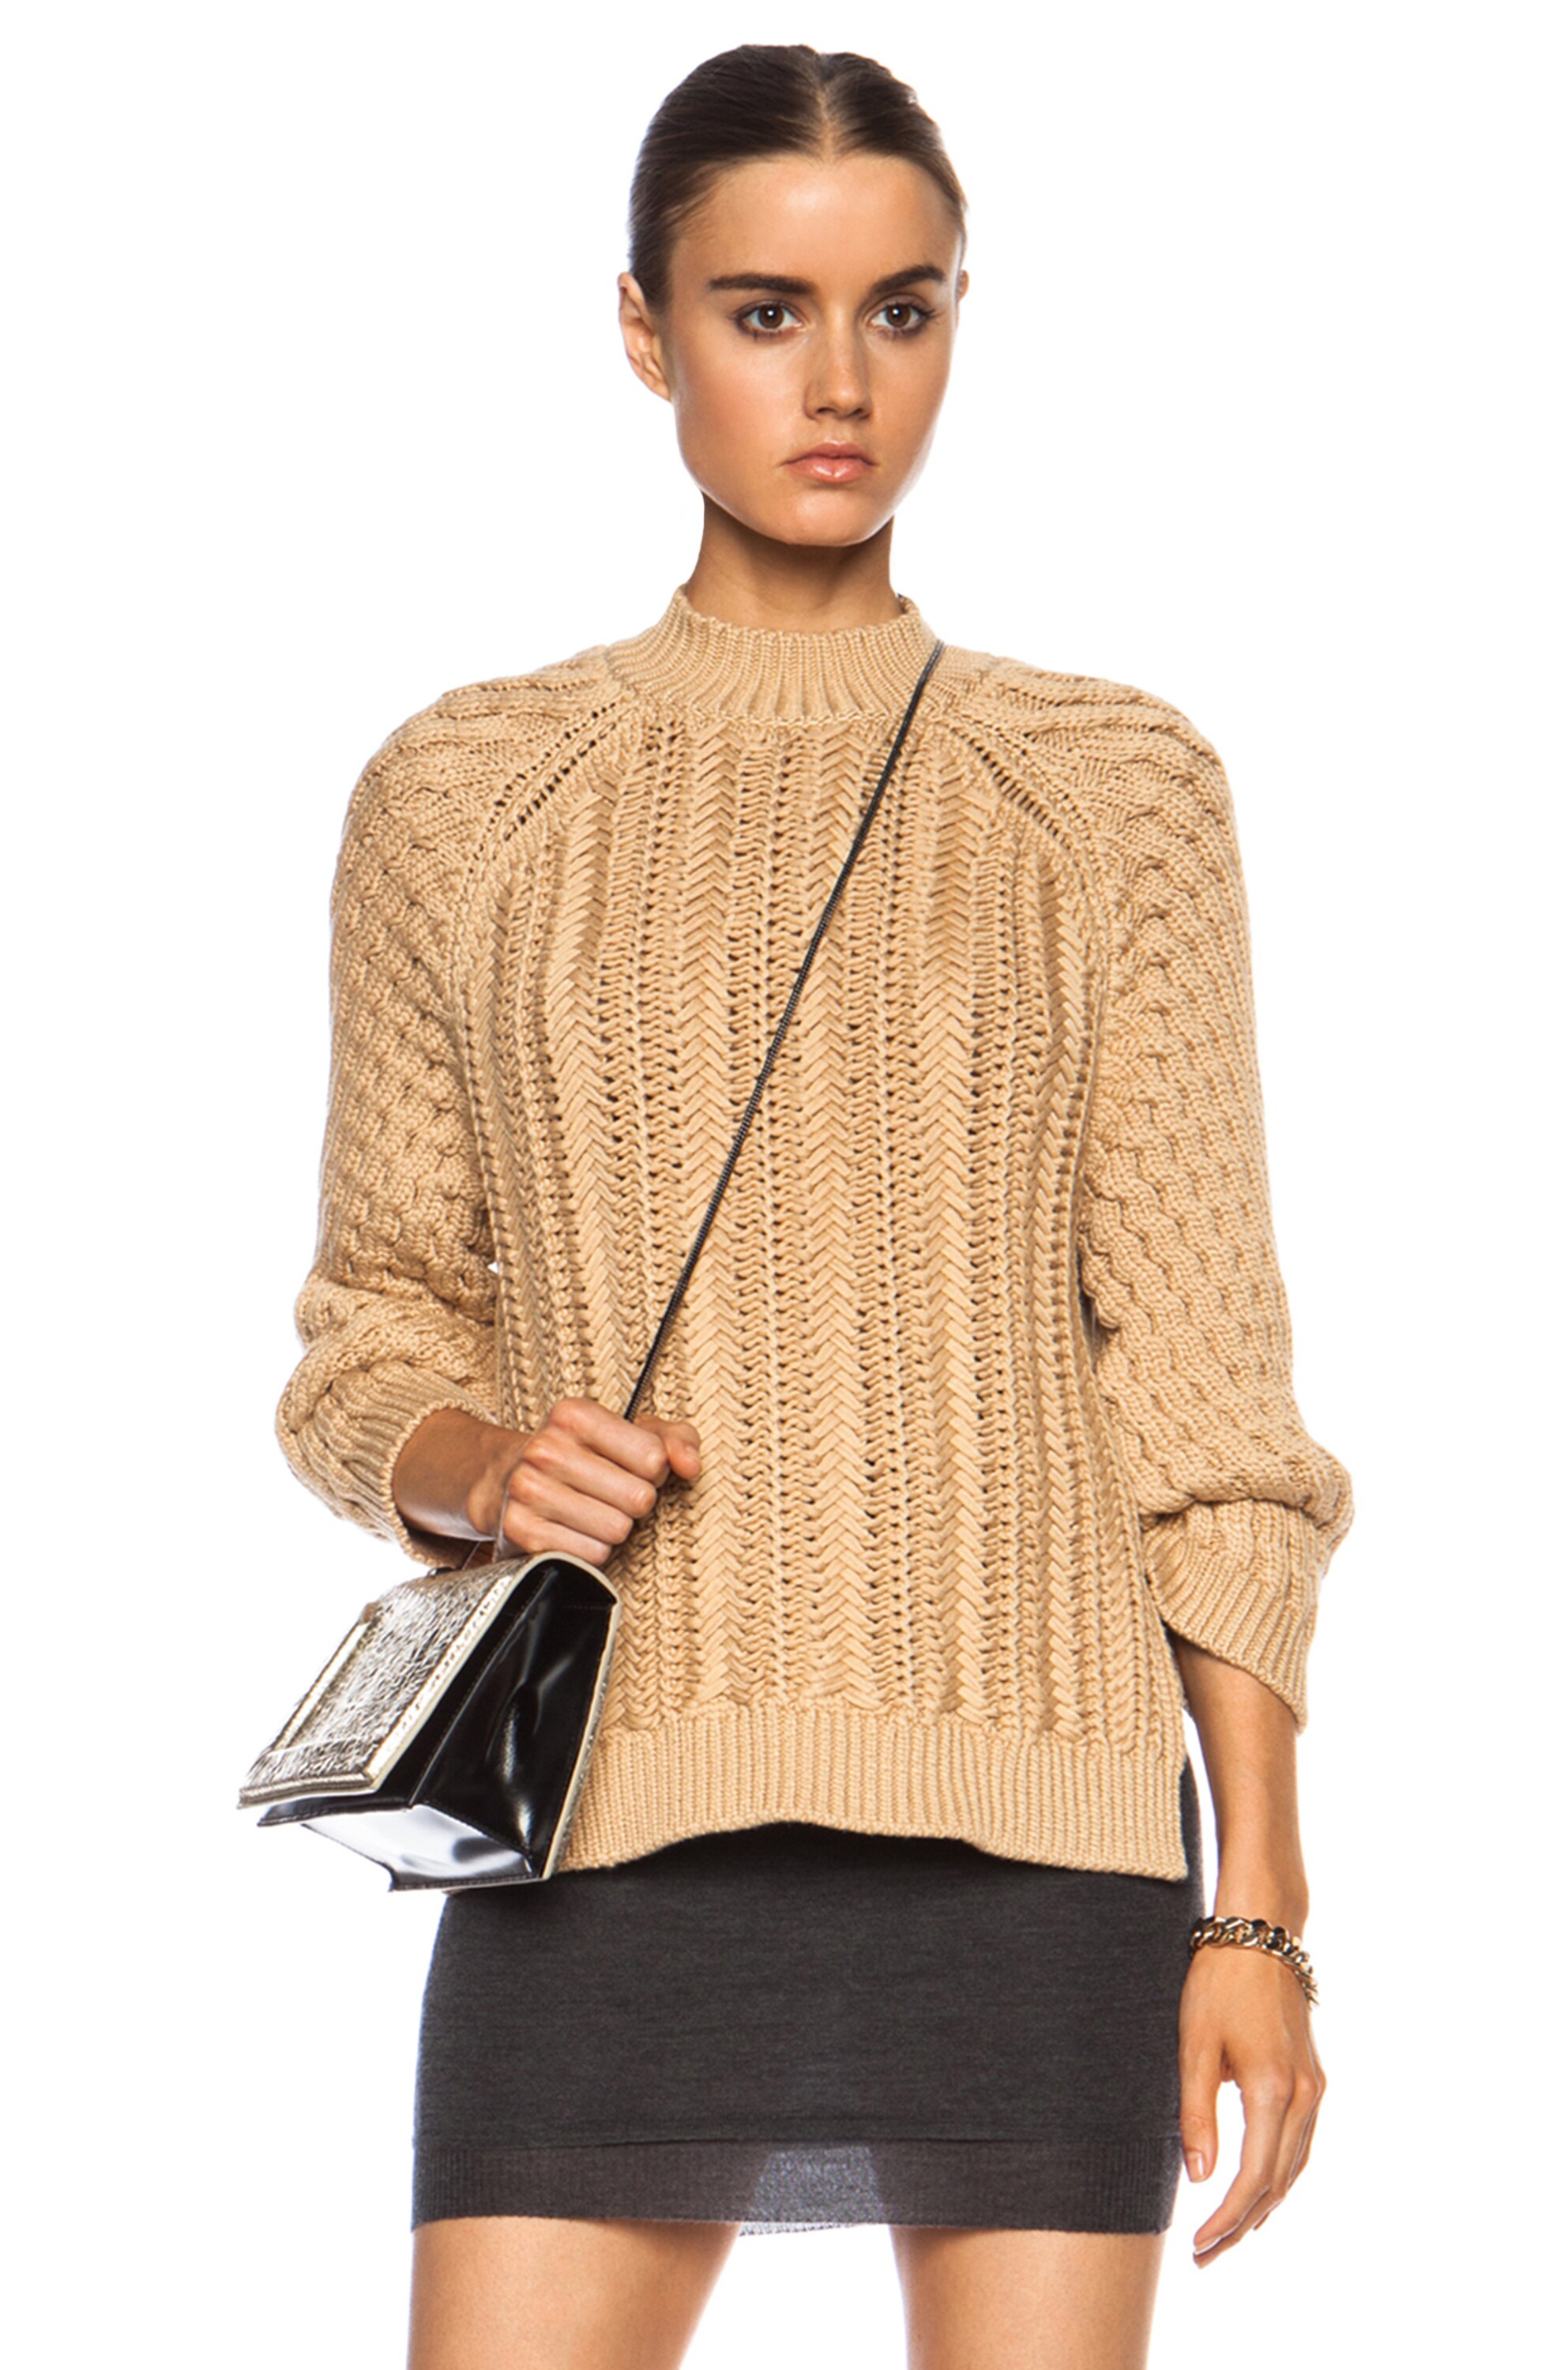 3.1 phillip lim Textured Cable Stitch Viscose-Blend Sweater in Camel | FWRD